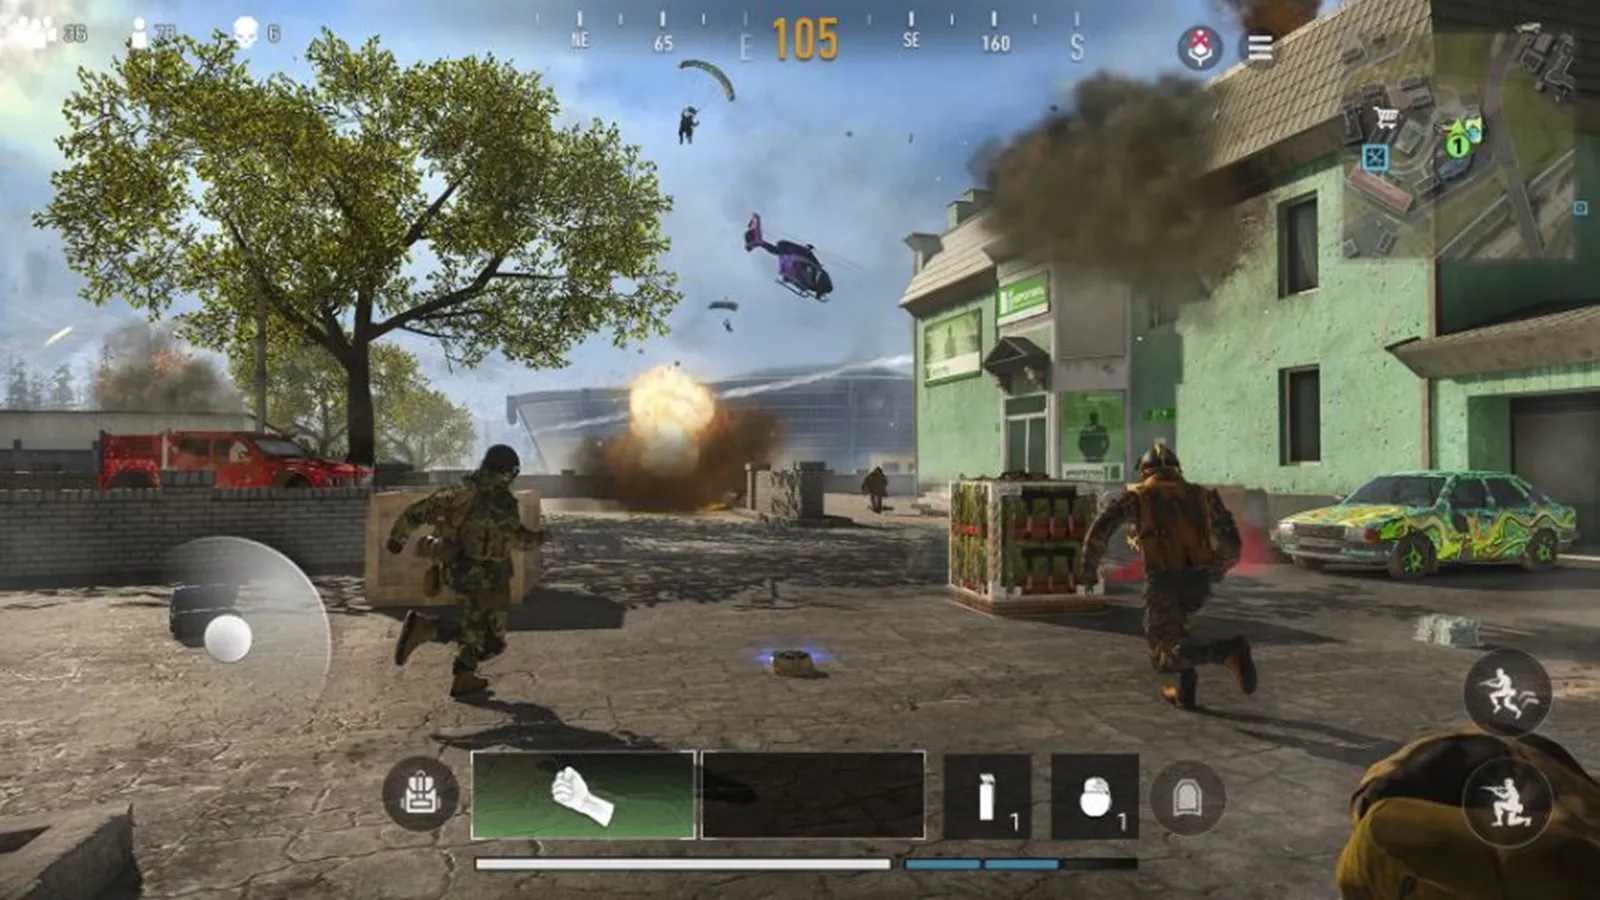 Call of Duty Warzone Mobile: guide to the best settings